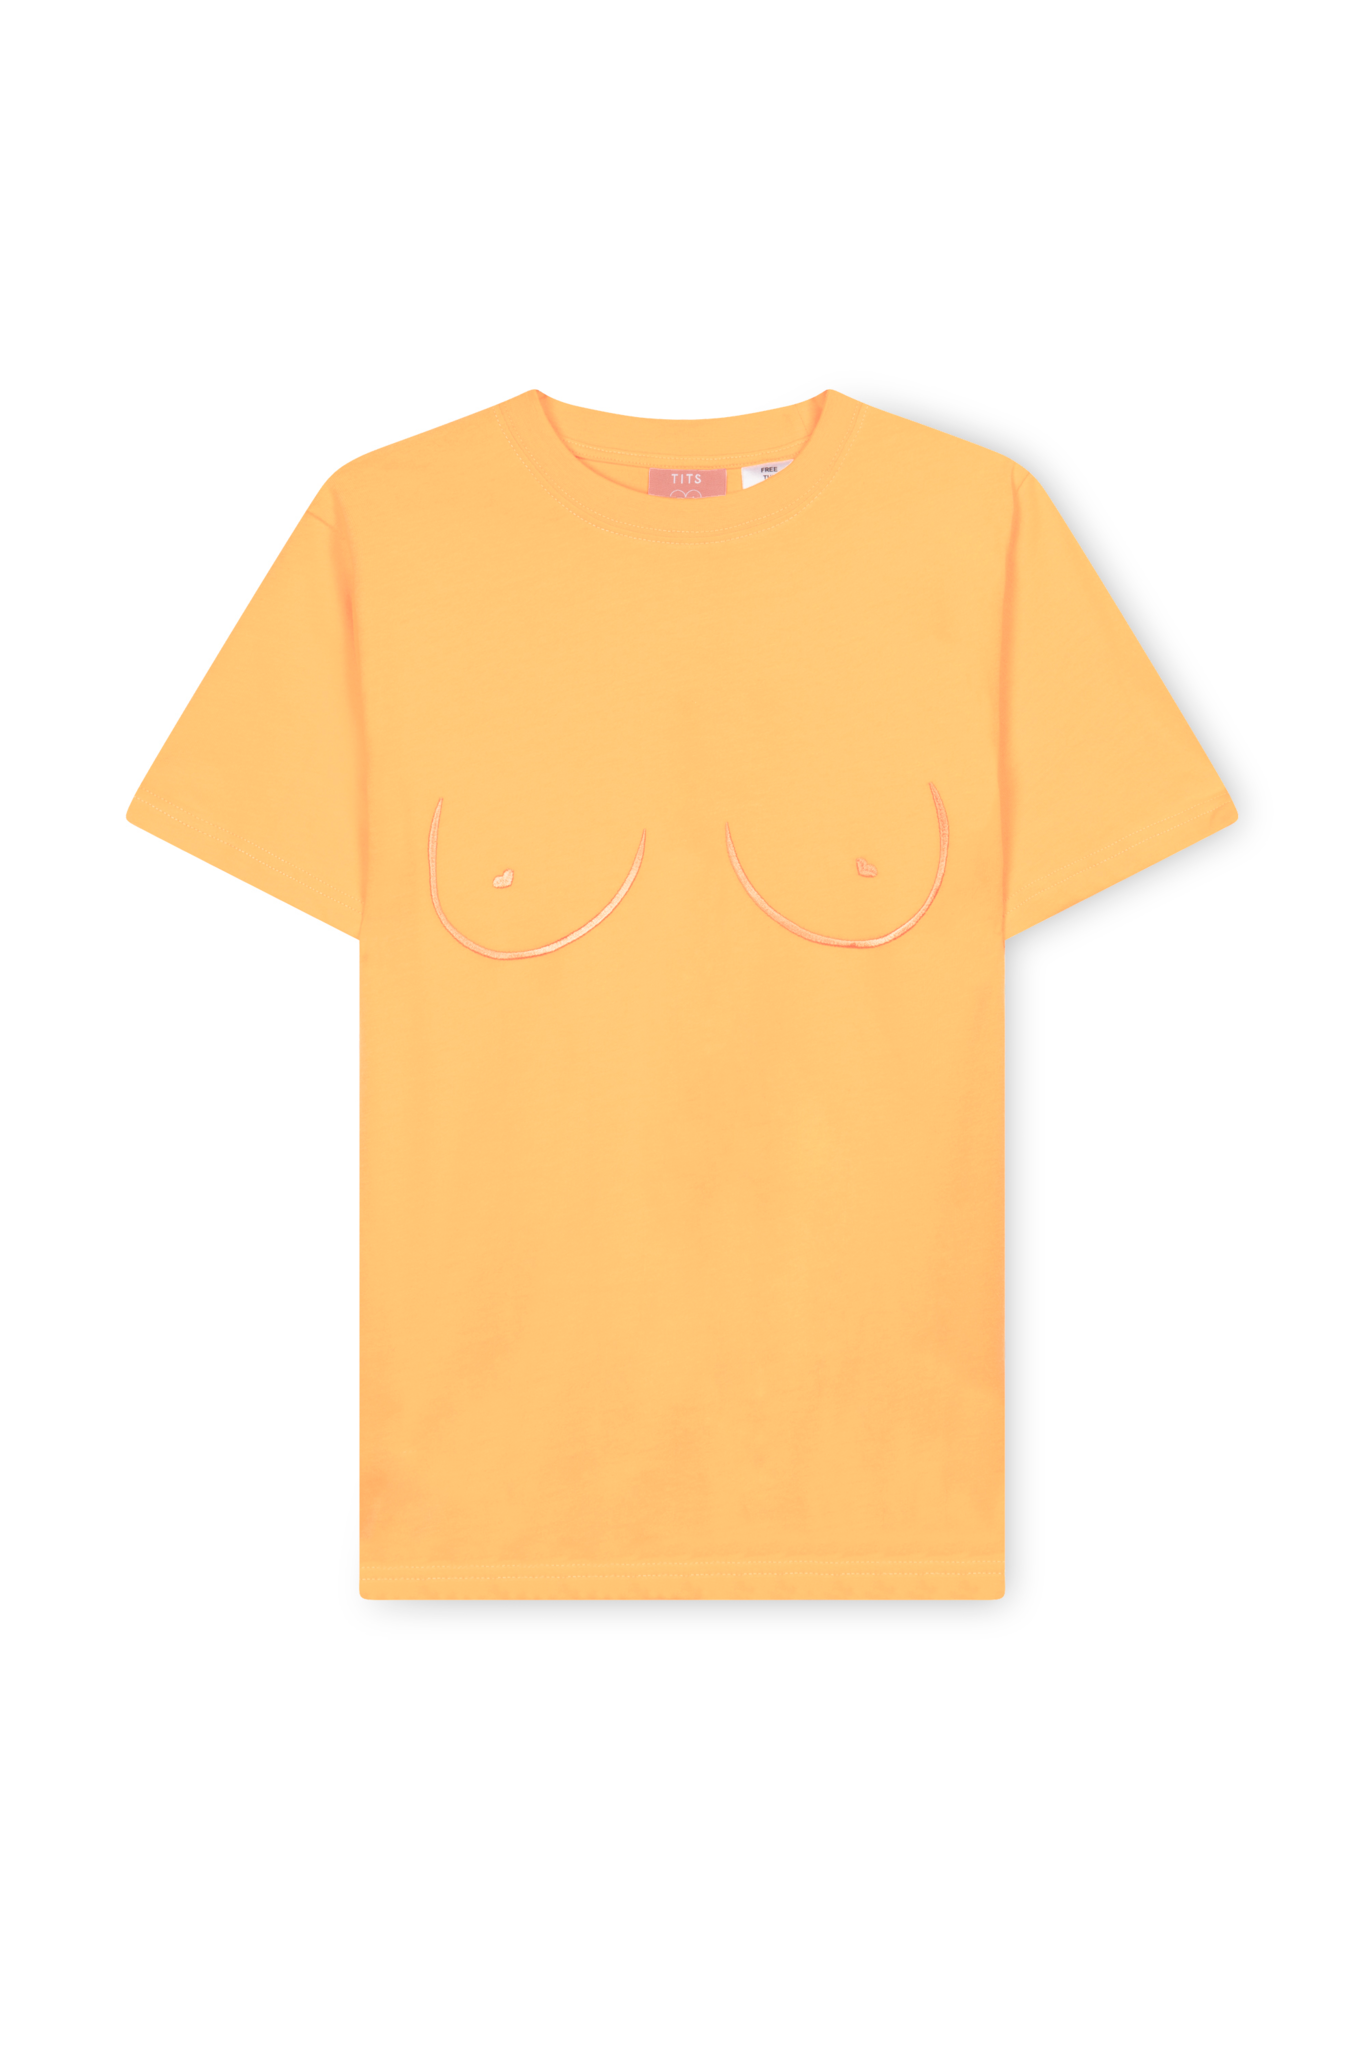 Tits Shirt in Orange by T.I.T.S.